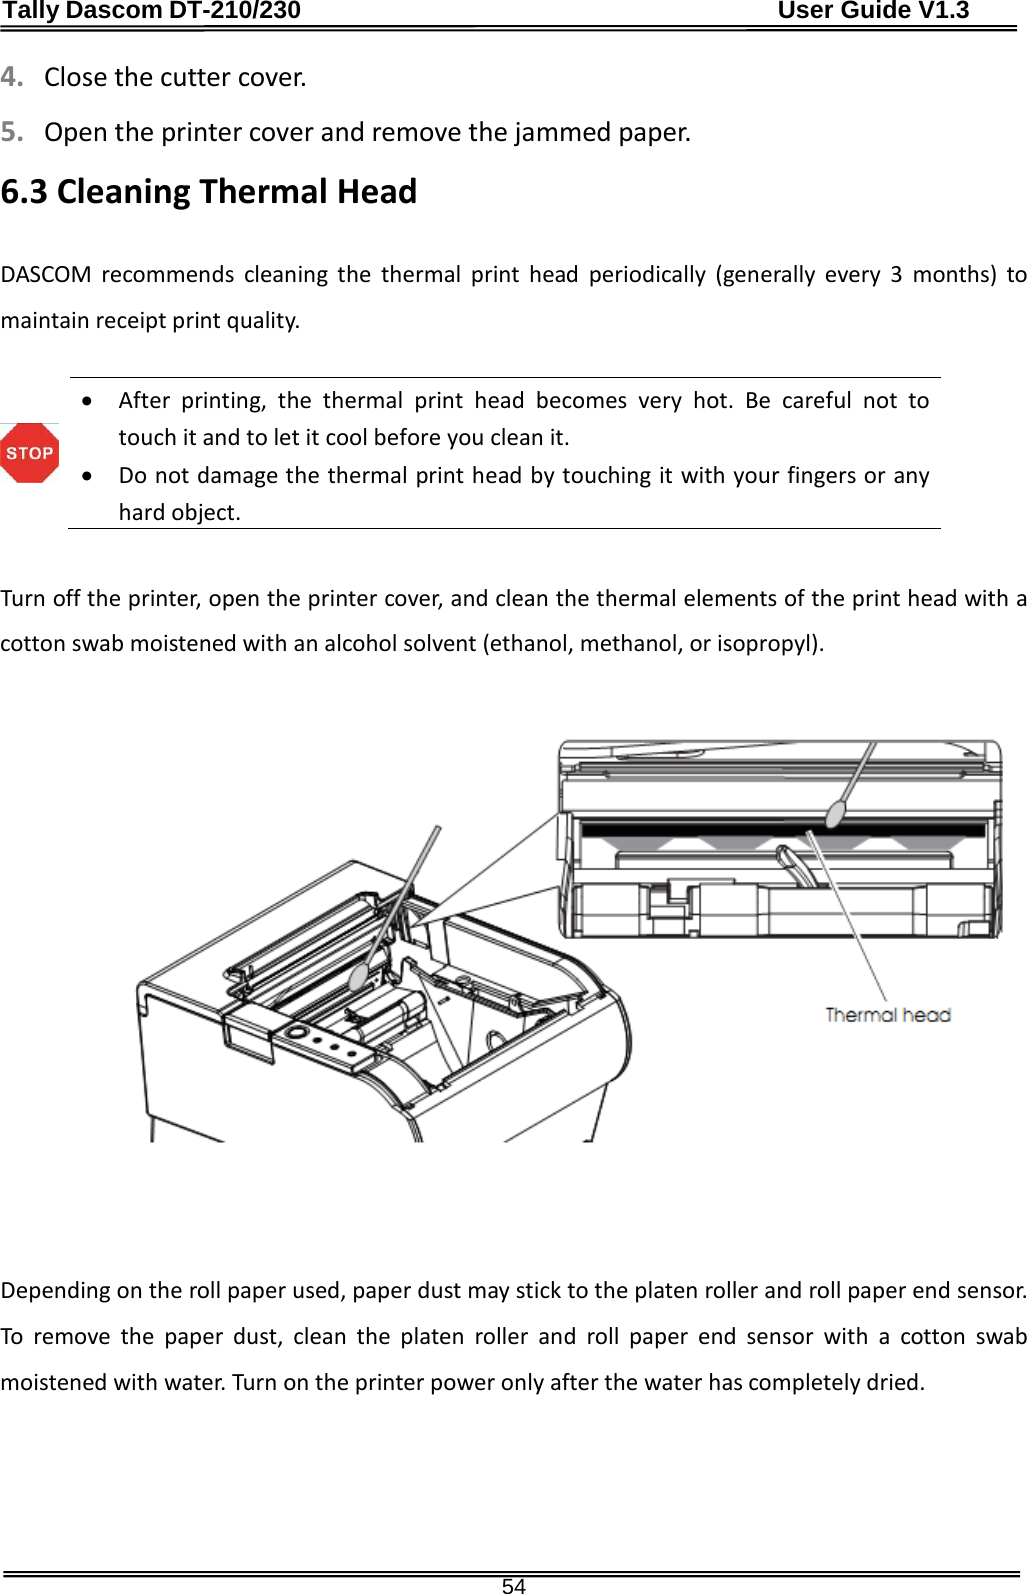 Tally Dascom DT-210/230                                      User Guide V1.3  54 4. Close the cutter cover. 5. Open the printer cover and remove the jammed paper. 6.3 Cleaning Thermal Head  DASCOM recommends cleaning the thermal print head periodically (generally every 3 months) to maintain receipt print quality.   • After printing, the thermal print head becomes very hot. Be careful not to touch it and to let it cool before you clean it.   • Do not damage the thermal print head by touching it with your fingers or any hard object.   Turn off the printer, open the printer cover, and clean the thermal elements of the print head with a cotton swab moistened with an alcohol solvent (ethanol, methanol, or isopropyl).                Depending on the roll paper used, paper dust may stick to the platen roller and roll paper end sensor.  To remove the paper dust, clean the platen roller and roll paper end sensor with a cotton swab moistened with water. Turn on the printer power only after the water has completely dried.     